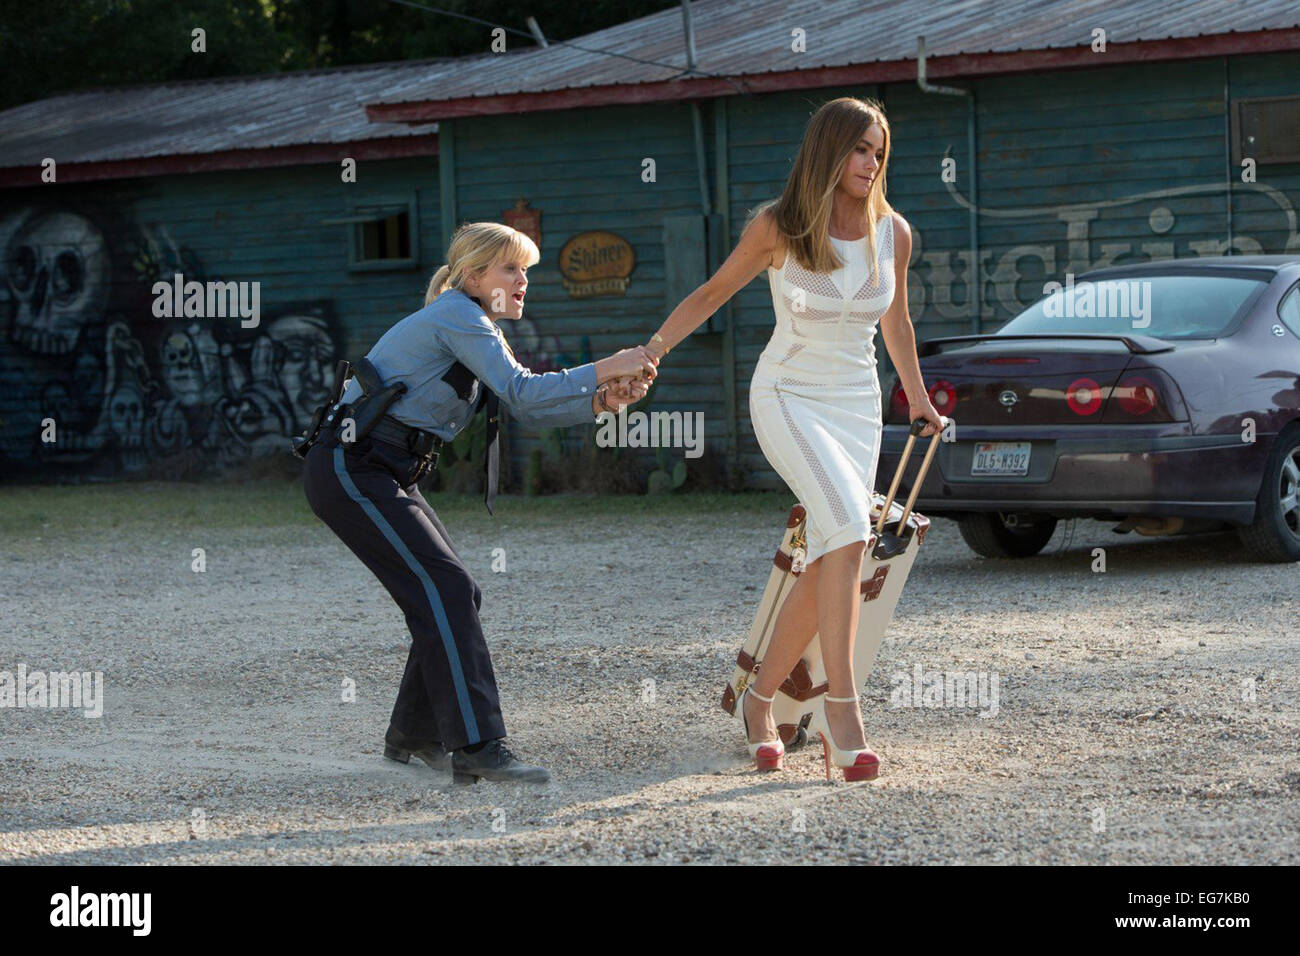 Hot Pursuit, originally titled Don't Mess with Texas, is an upcoming American action comedy film directed by Anne Fletcher and written by David Feeney and John Quaintance. The film stars Reese Witherspoon and Sofía Vergara. The film is scheduled to be released on May 8, 2015, by Warner Bros. Pictures Stock Photo